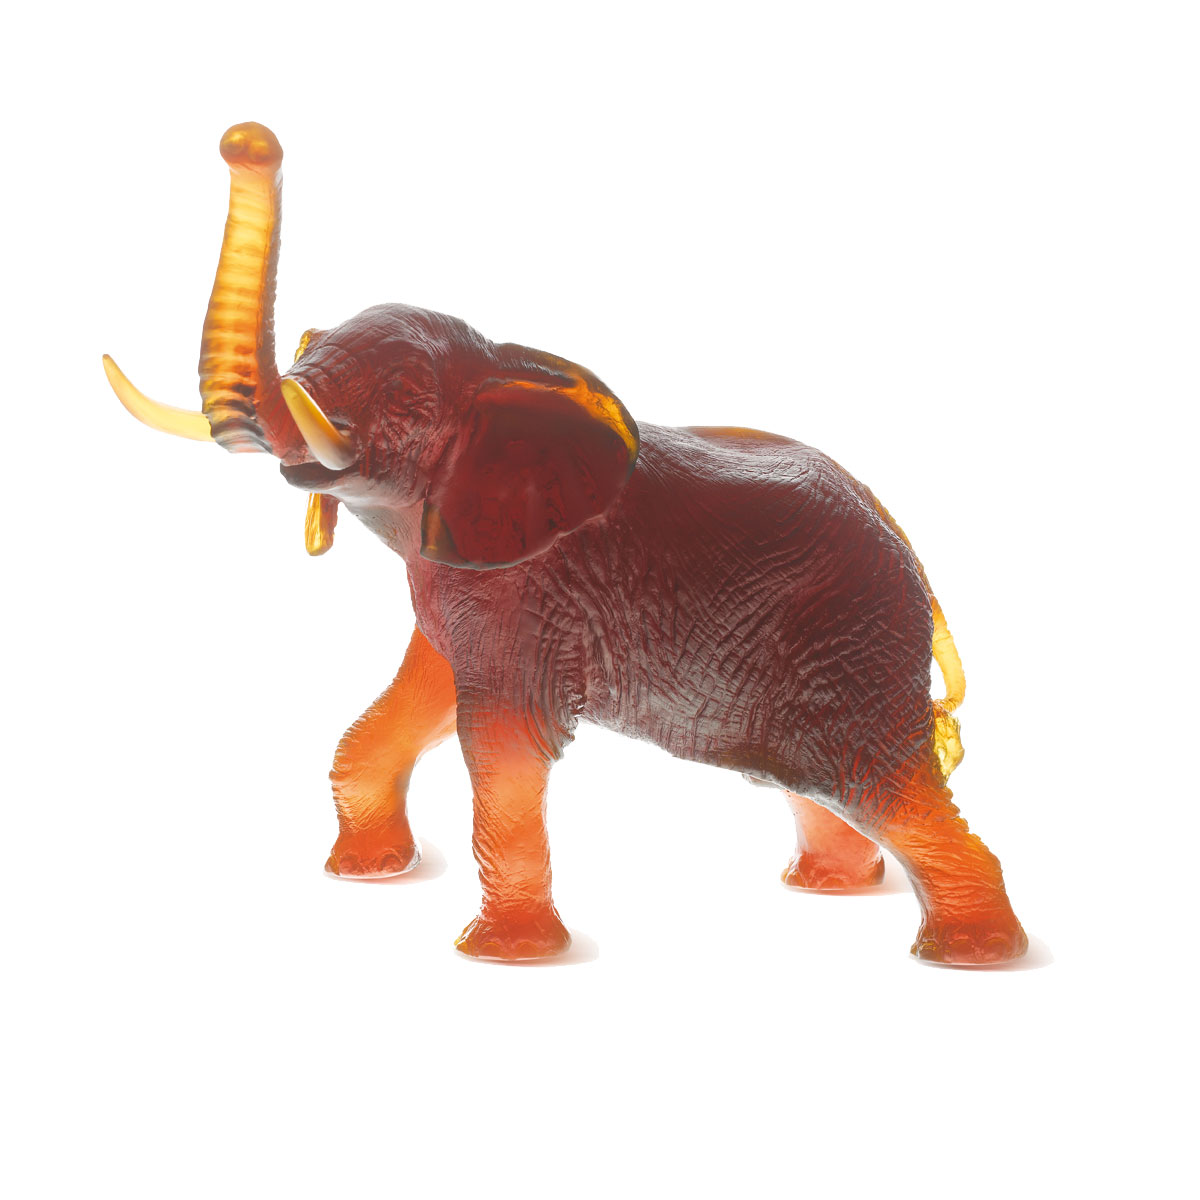 Daum Elephant in Amber by Jean-Francois Leroy Sculpture